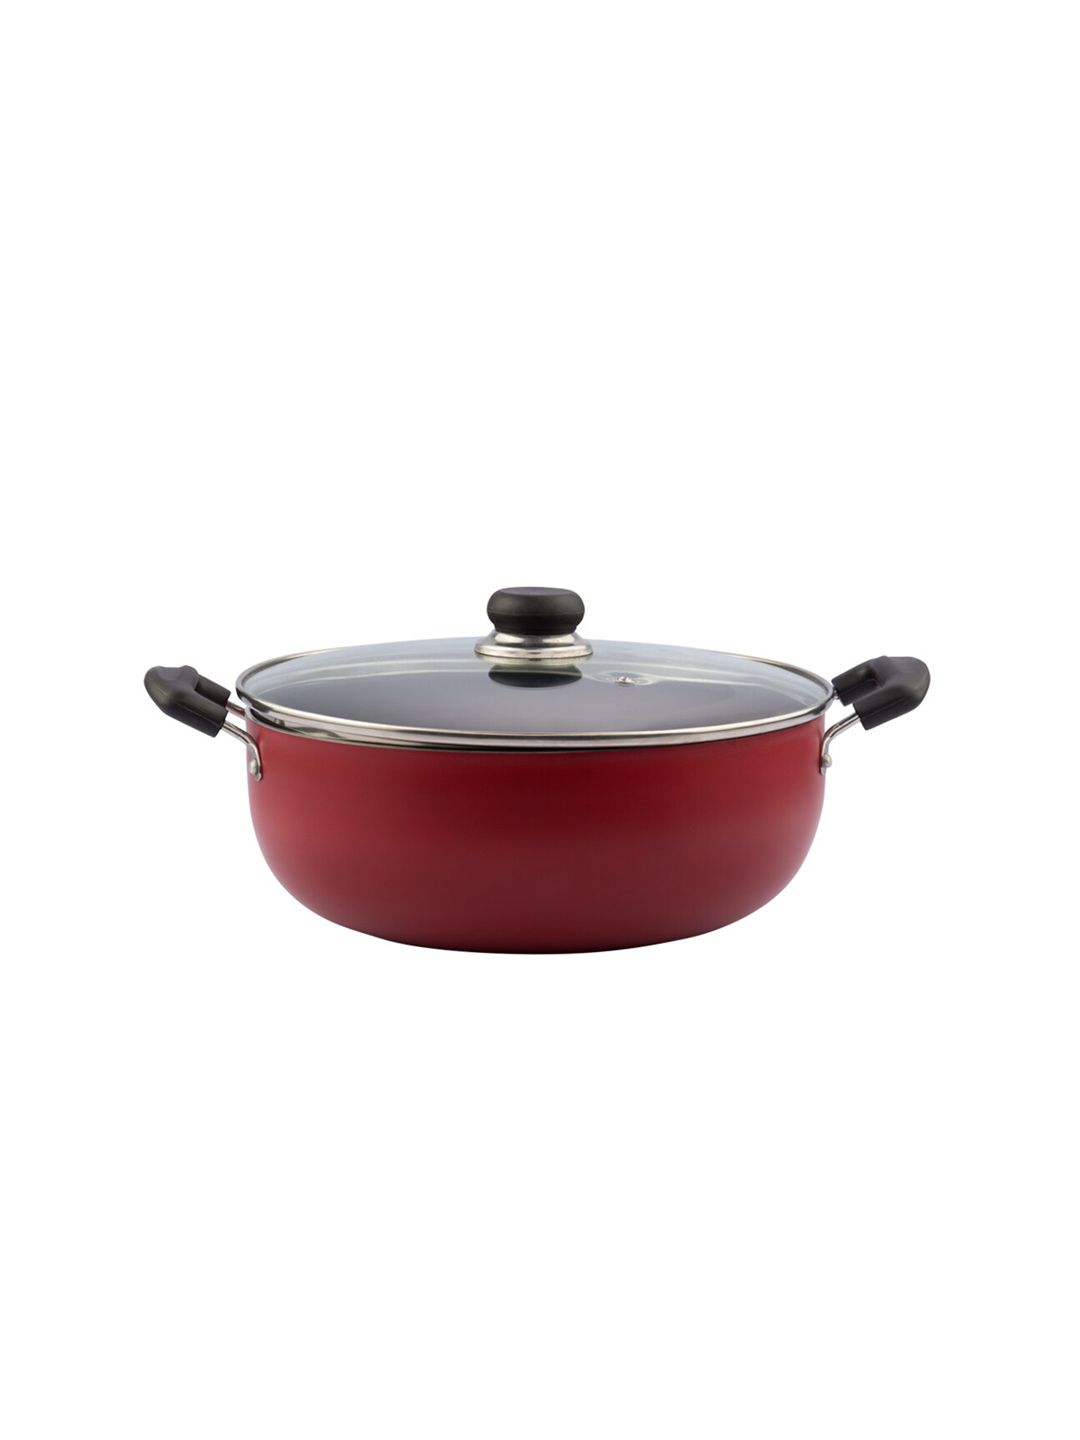 Vinod Red & Black Solid Non-Stick Induction Deep Kadai with Lid Price in India